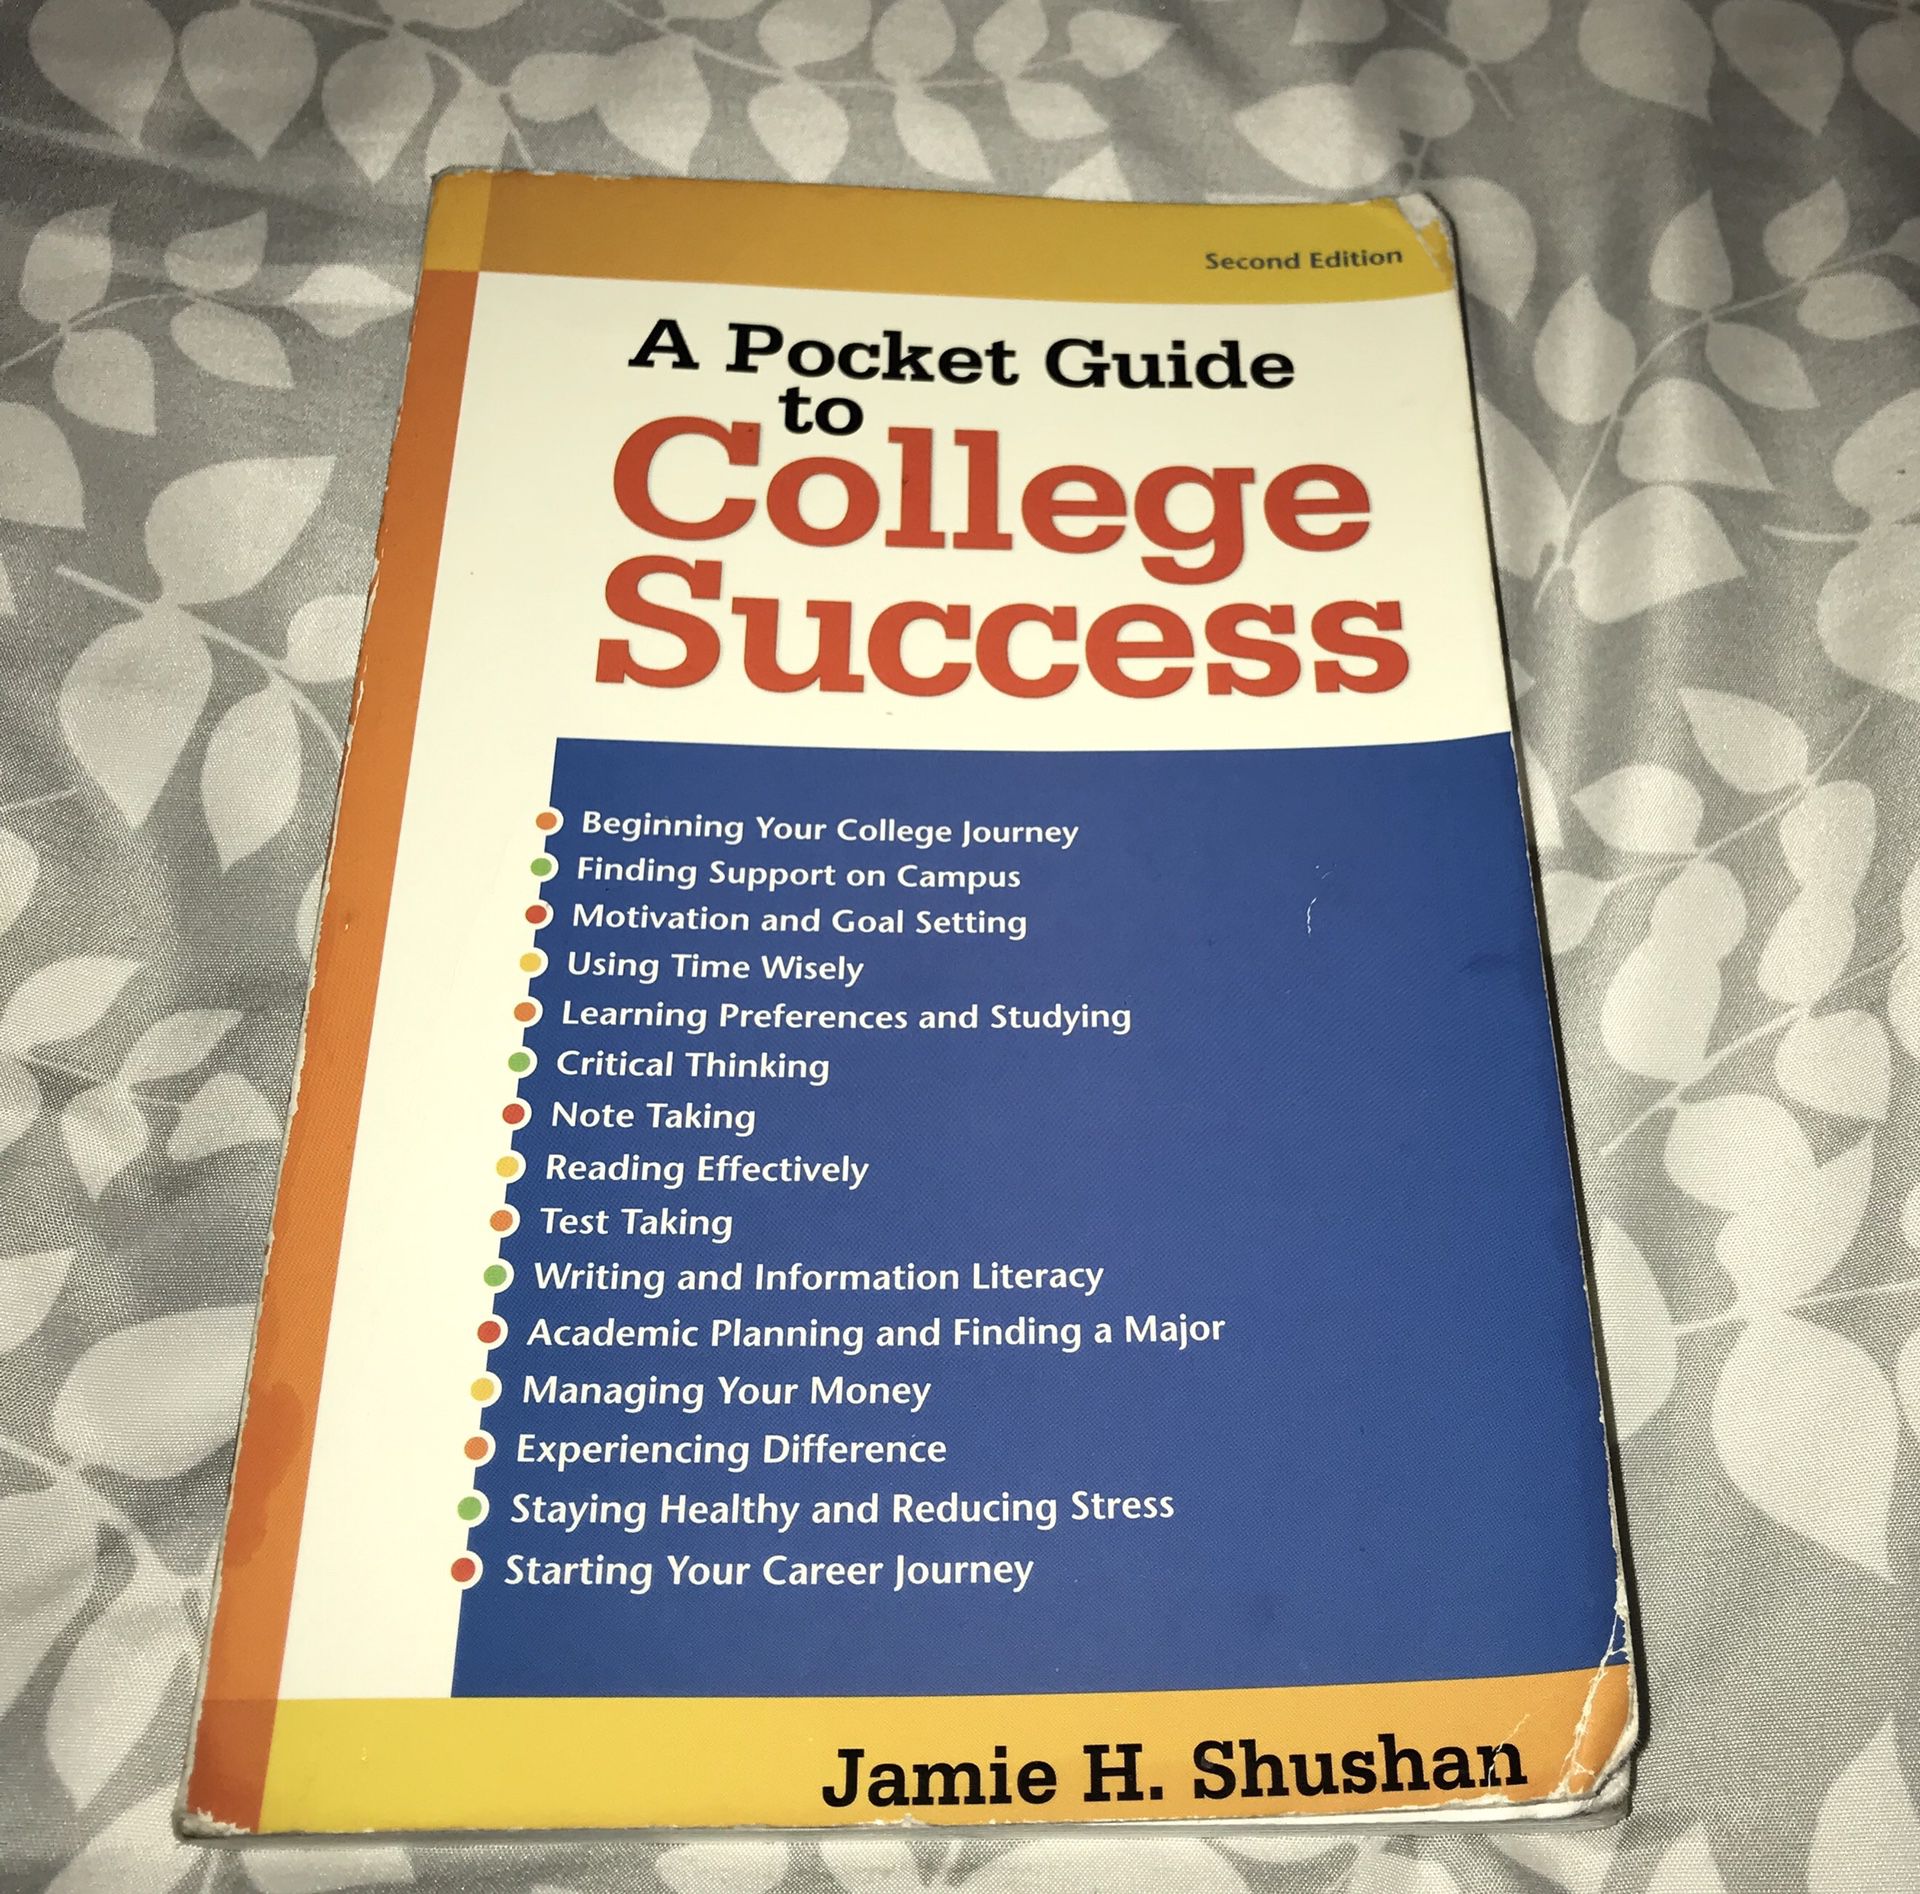 A Pocket Guide to College Success